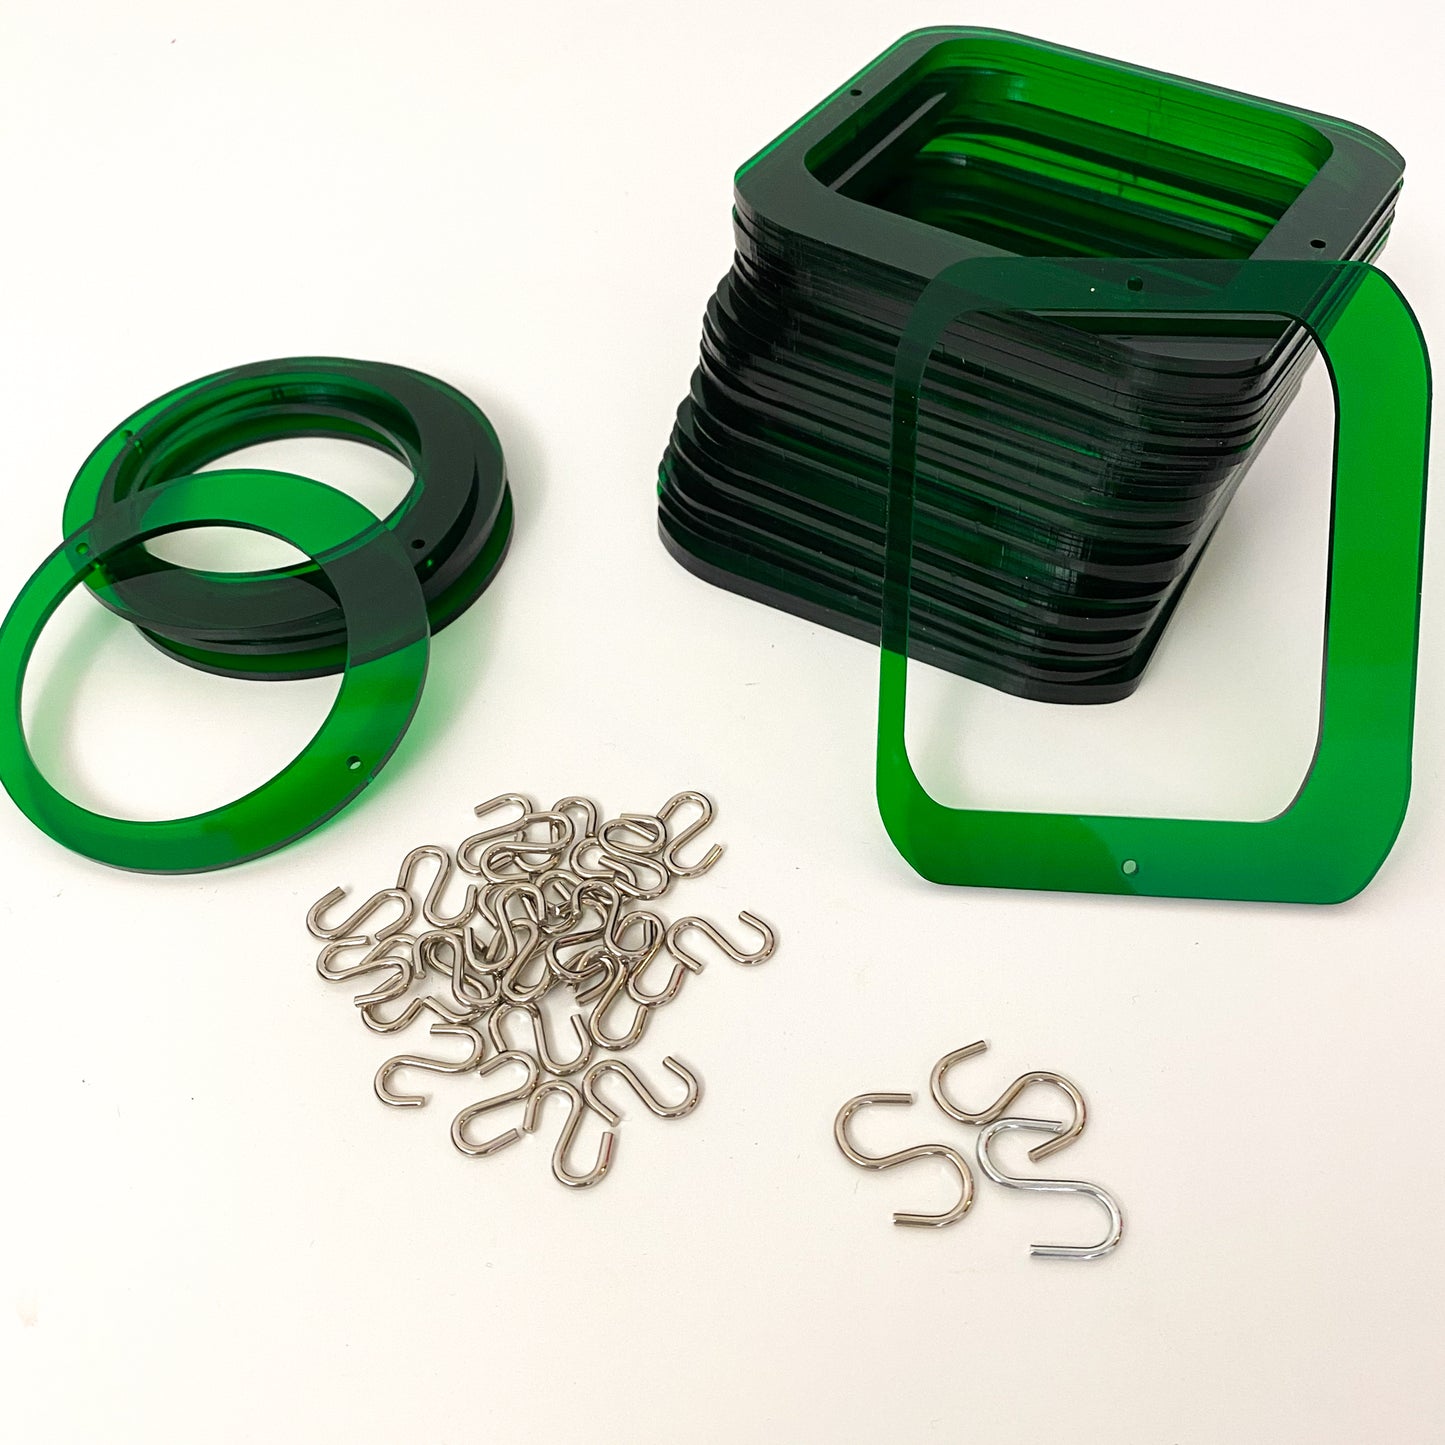 Parts for cool retro kinetic art piece DIY KIT in green for wall art, mobiles, or room dividers by AtomicMobiles.com